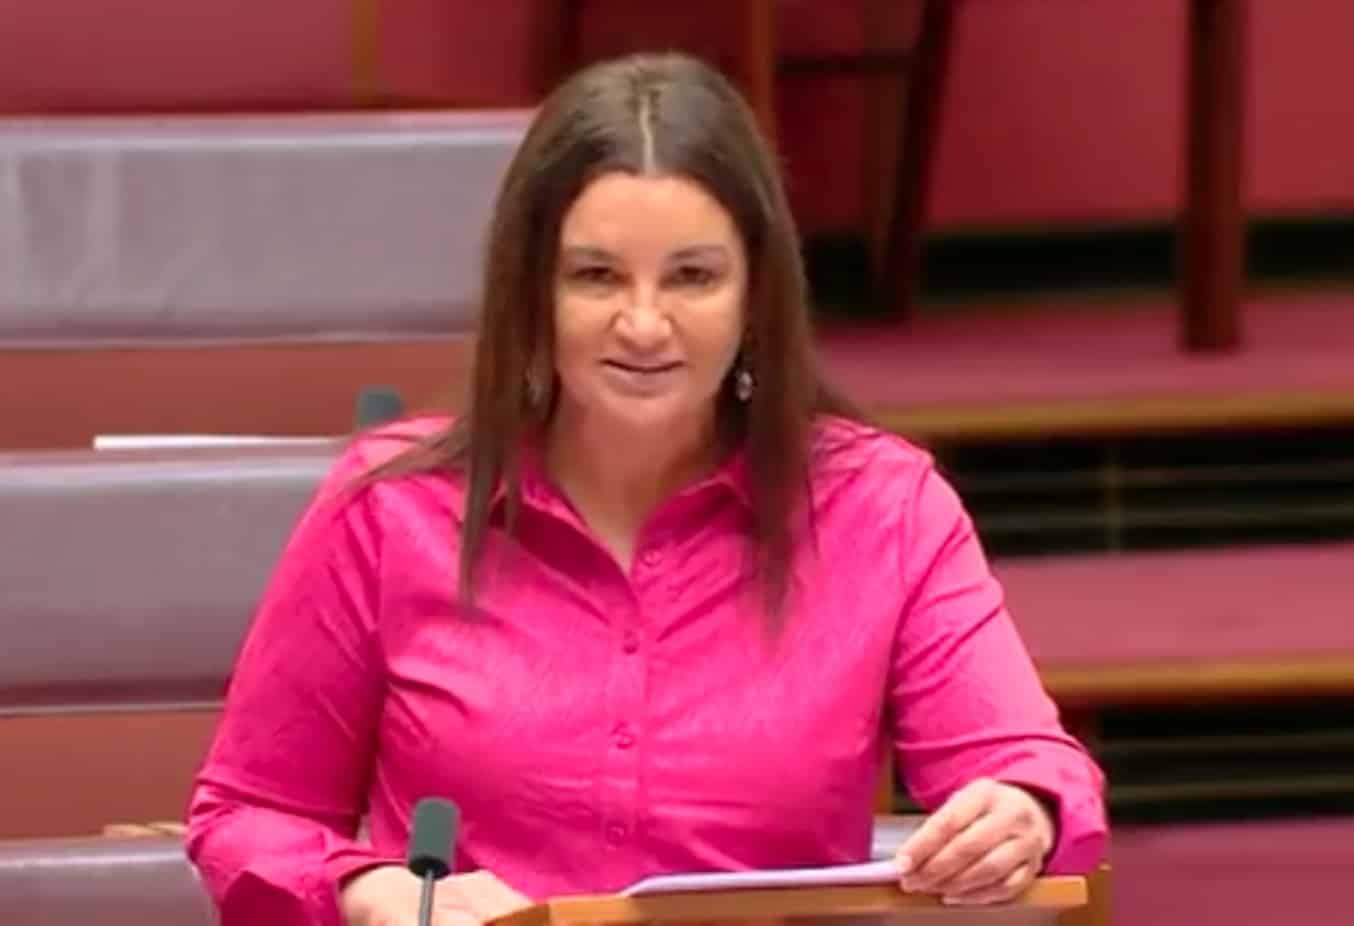 ‘It’s called being a god damn bloody adult’: Aussie politician’s blunt takedown of anti-vax bill